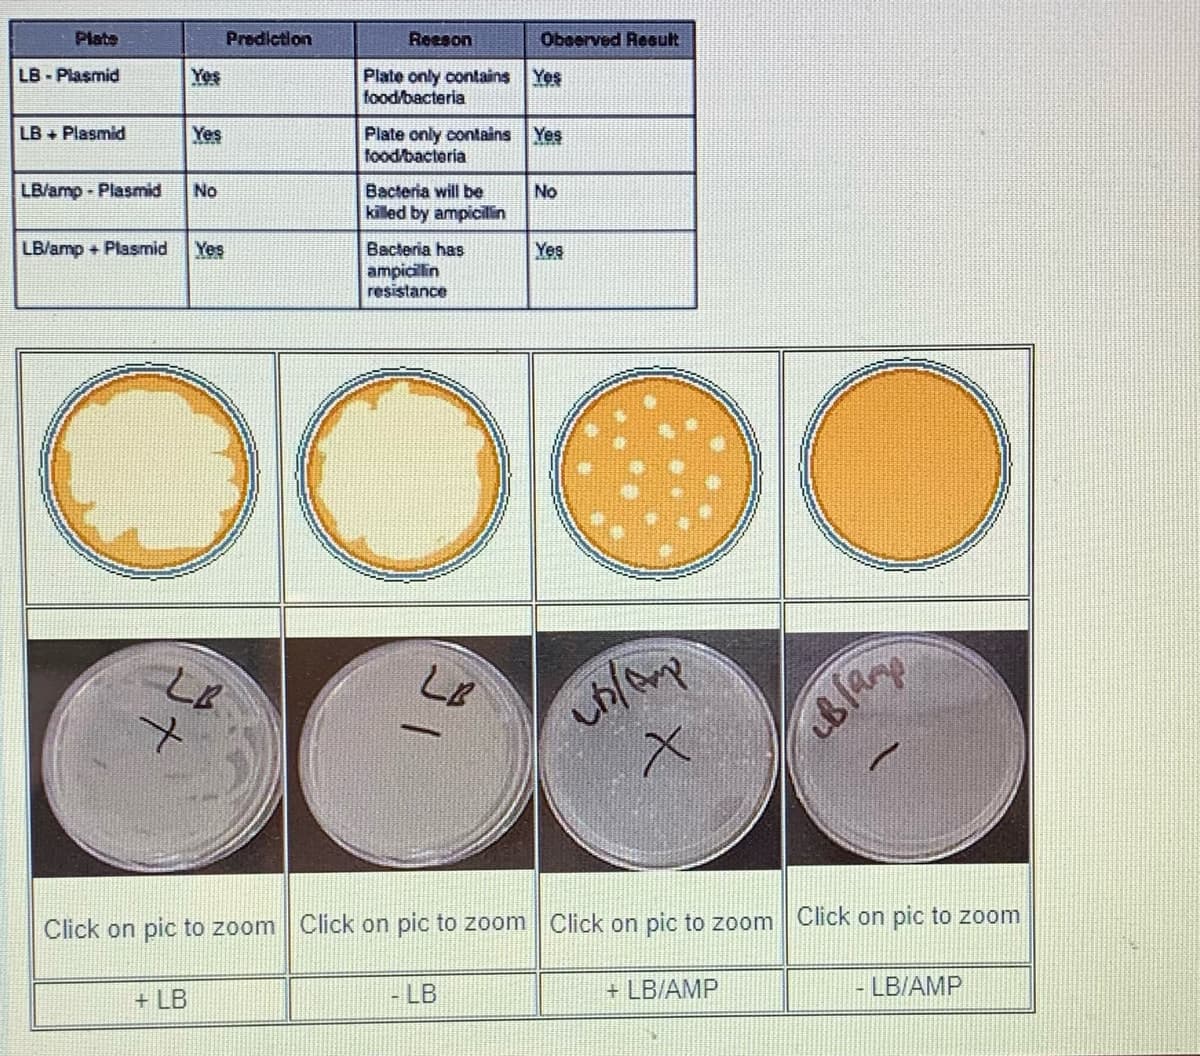 Plate
LB-Plasmid
LB + Plasmid
LB/amp - Plasmid
Yes
Yes
No
+ LB
LB/amp + Plasmid Yes
LB
Prediction
Reeson
Plate only contains Yes
food/bacteria
Plate only contains Yes
food/bacteria
Bacteria will be
killed by ampicillin
Bacteria has
ampicillin
resistance
LB
Click on pic to zoom Click on pic to zoom
-LB
Observed Result
No
Yes
chlamp
x
Click on pic to zoom
+ LB/AMP
Blamp
Click on pic to zoom
- LB/AMP